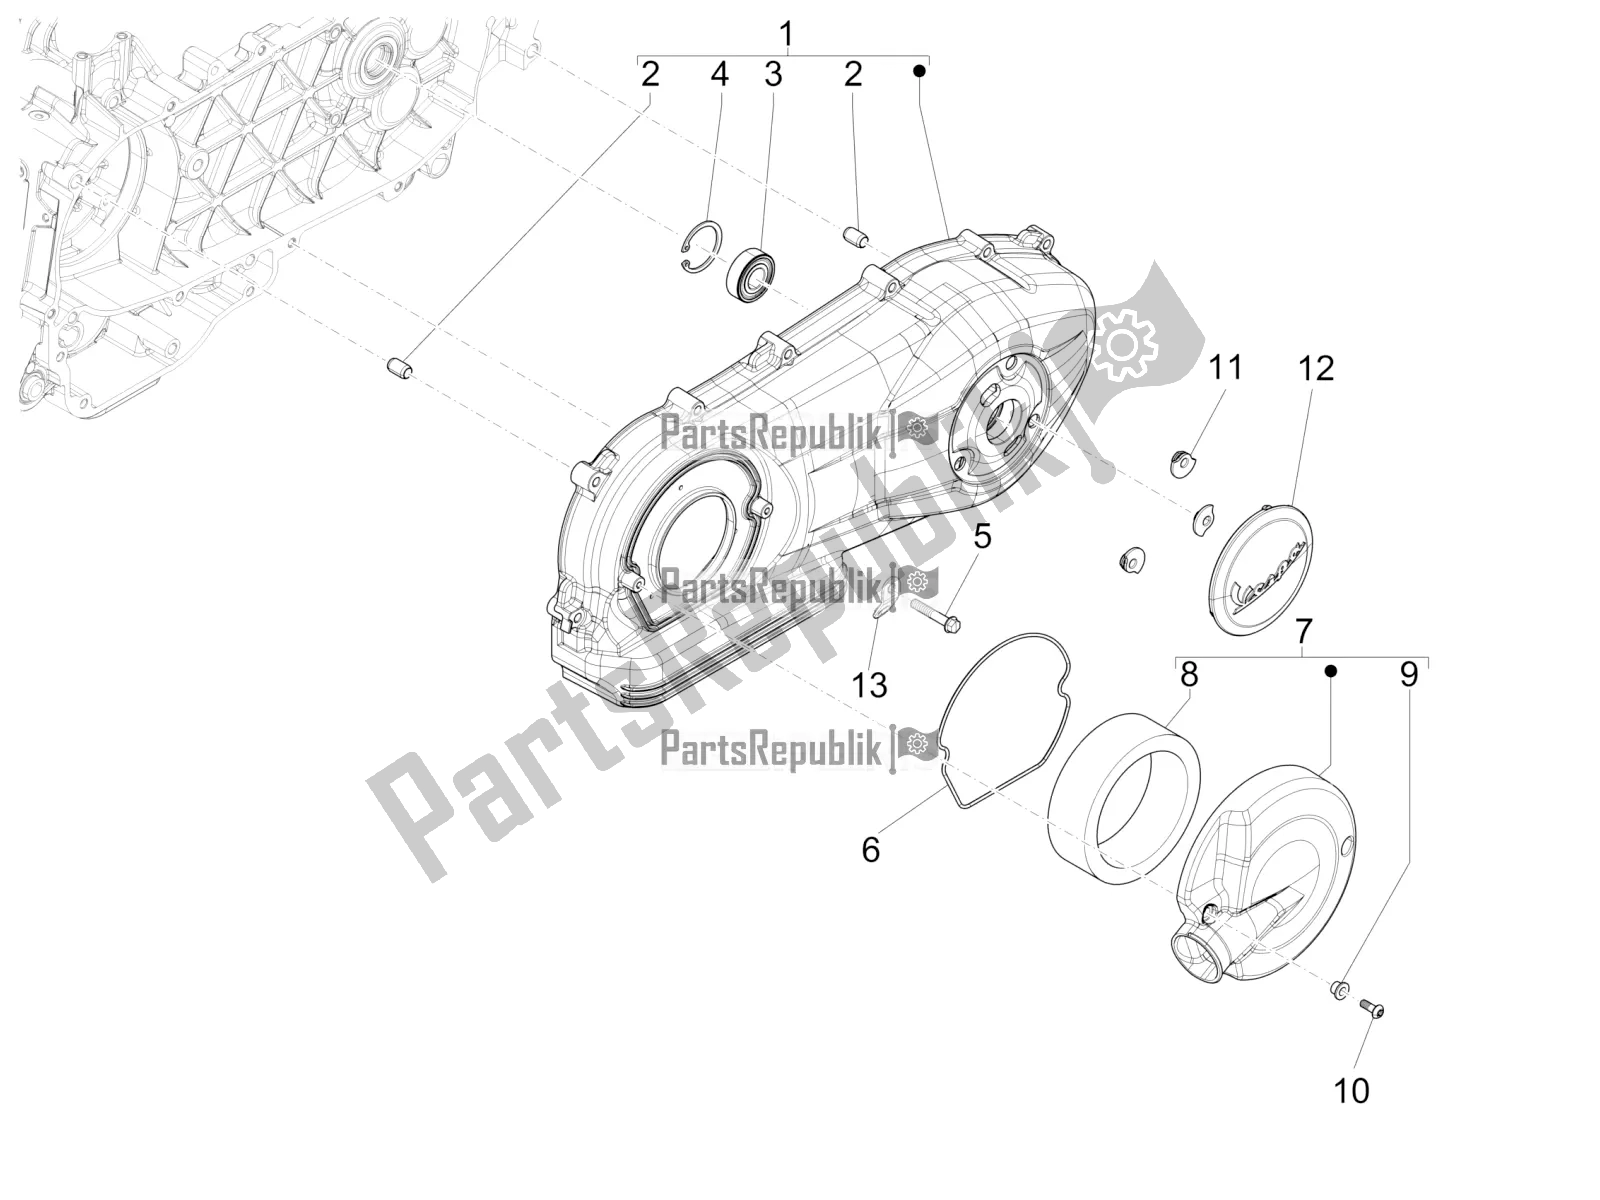 All parts for the Crankcase Cover - Crankcase Cooling of the Vespa 946 150 ABS CD Cina 2022